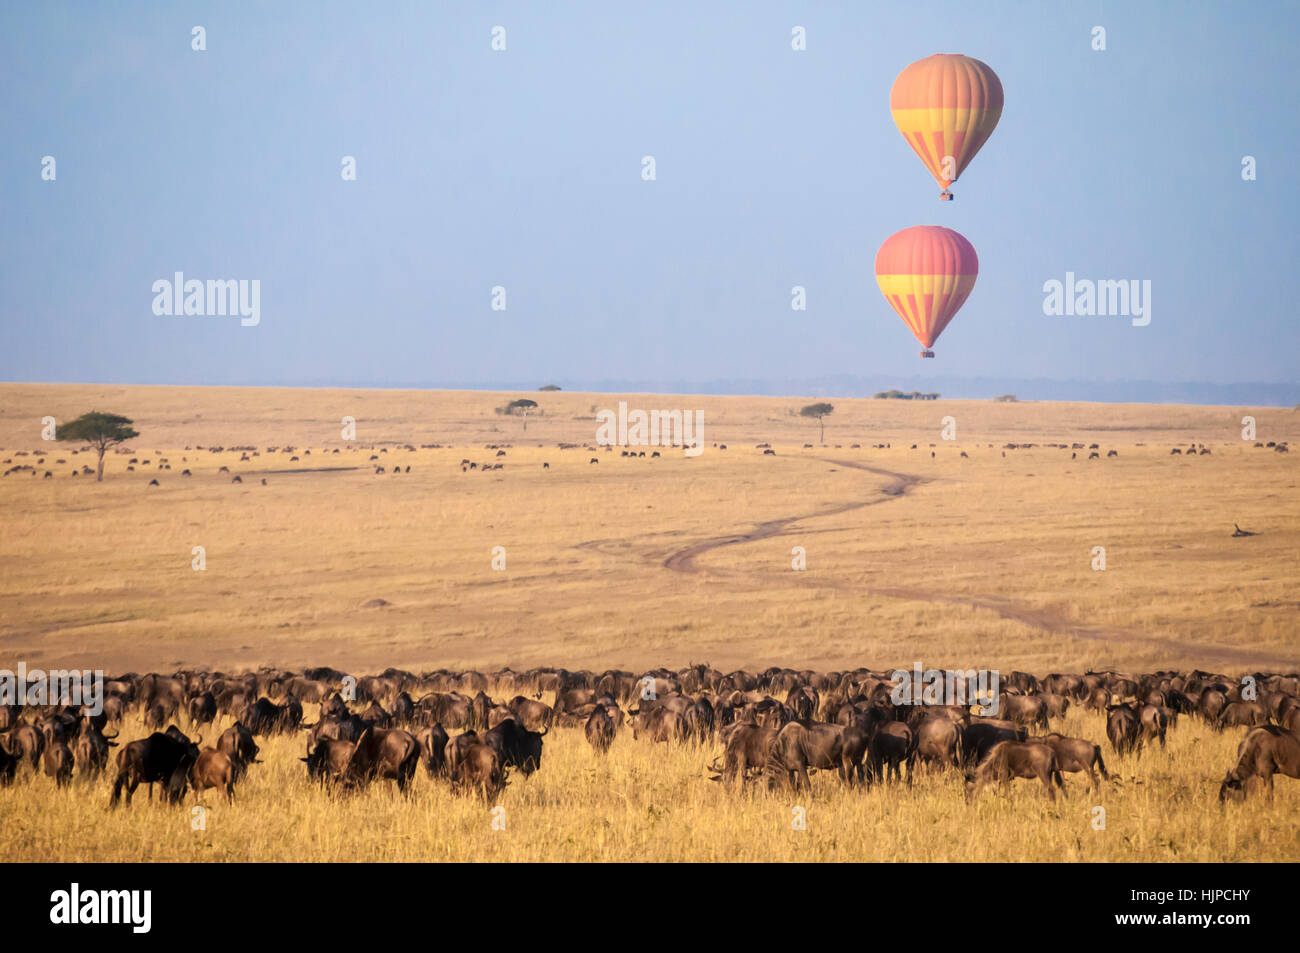 Two hot air tourist balloons over a herd of wildebeest in the Masai Mara, Kenya, East Africa Stock Photo